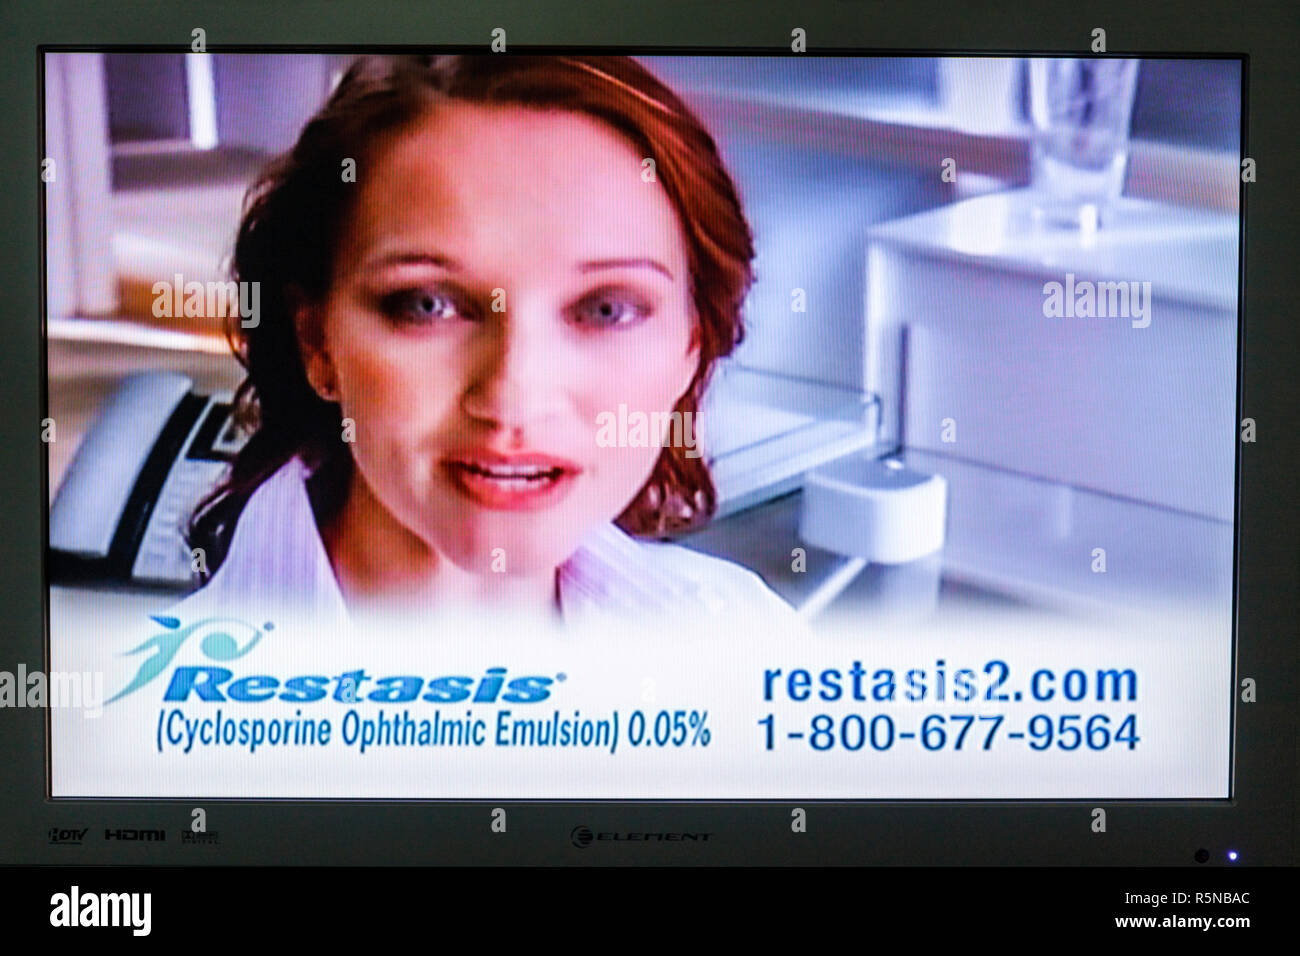 Miami Beach Florida,flat panel TV,television,set,screen shot,media,advertisement,ad,commercial,selling,sell,Restasis,prescription eye drops,ophthalmic Stock Photo